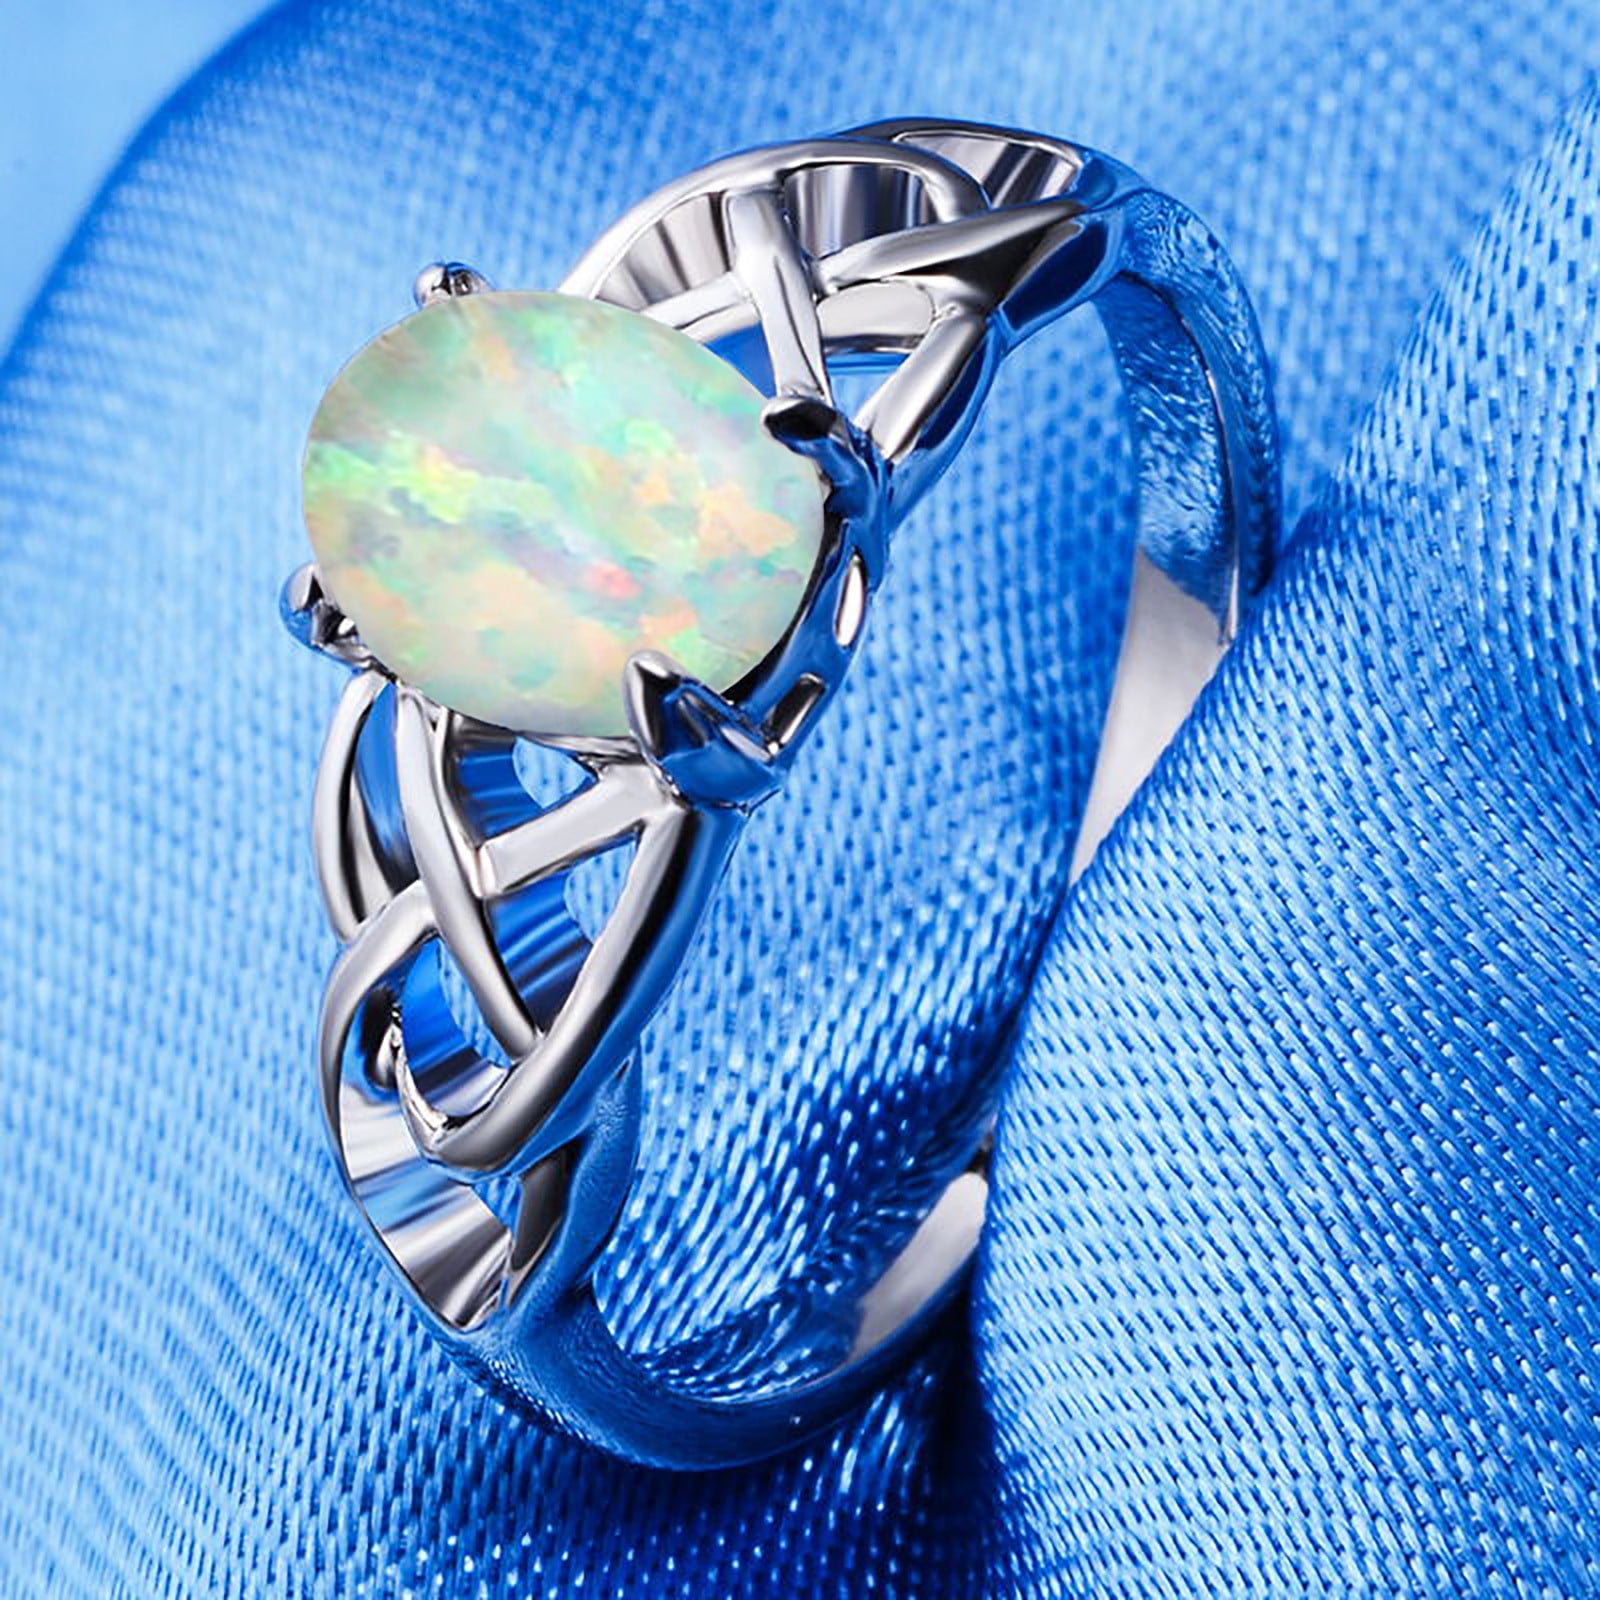 CFXNMZGR Rings For Women Opal Ring Round Opal White Stone Hand Jewelry ...